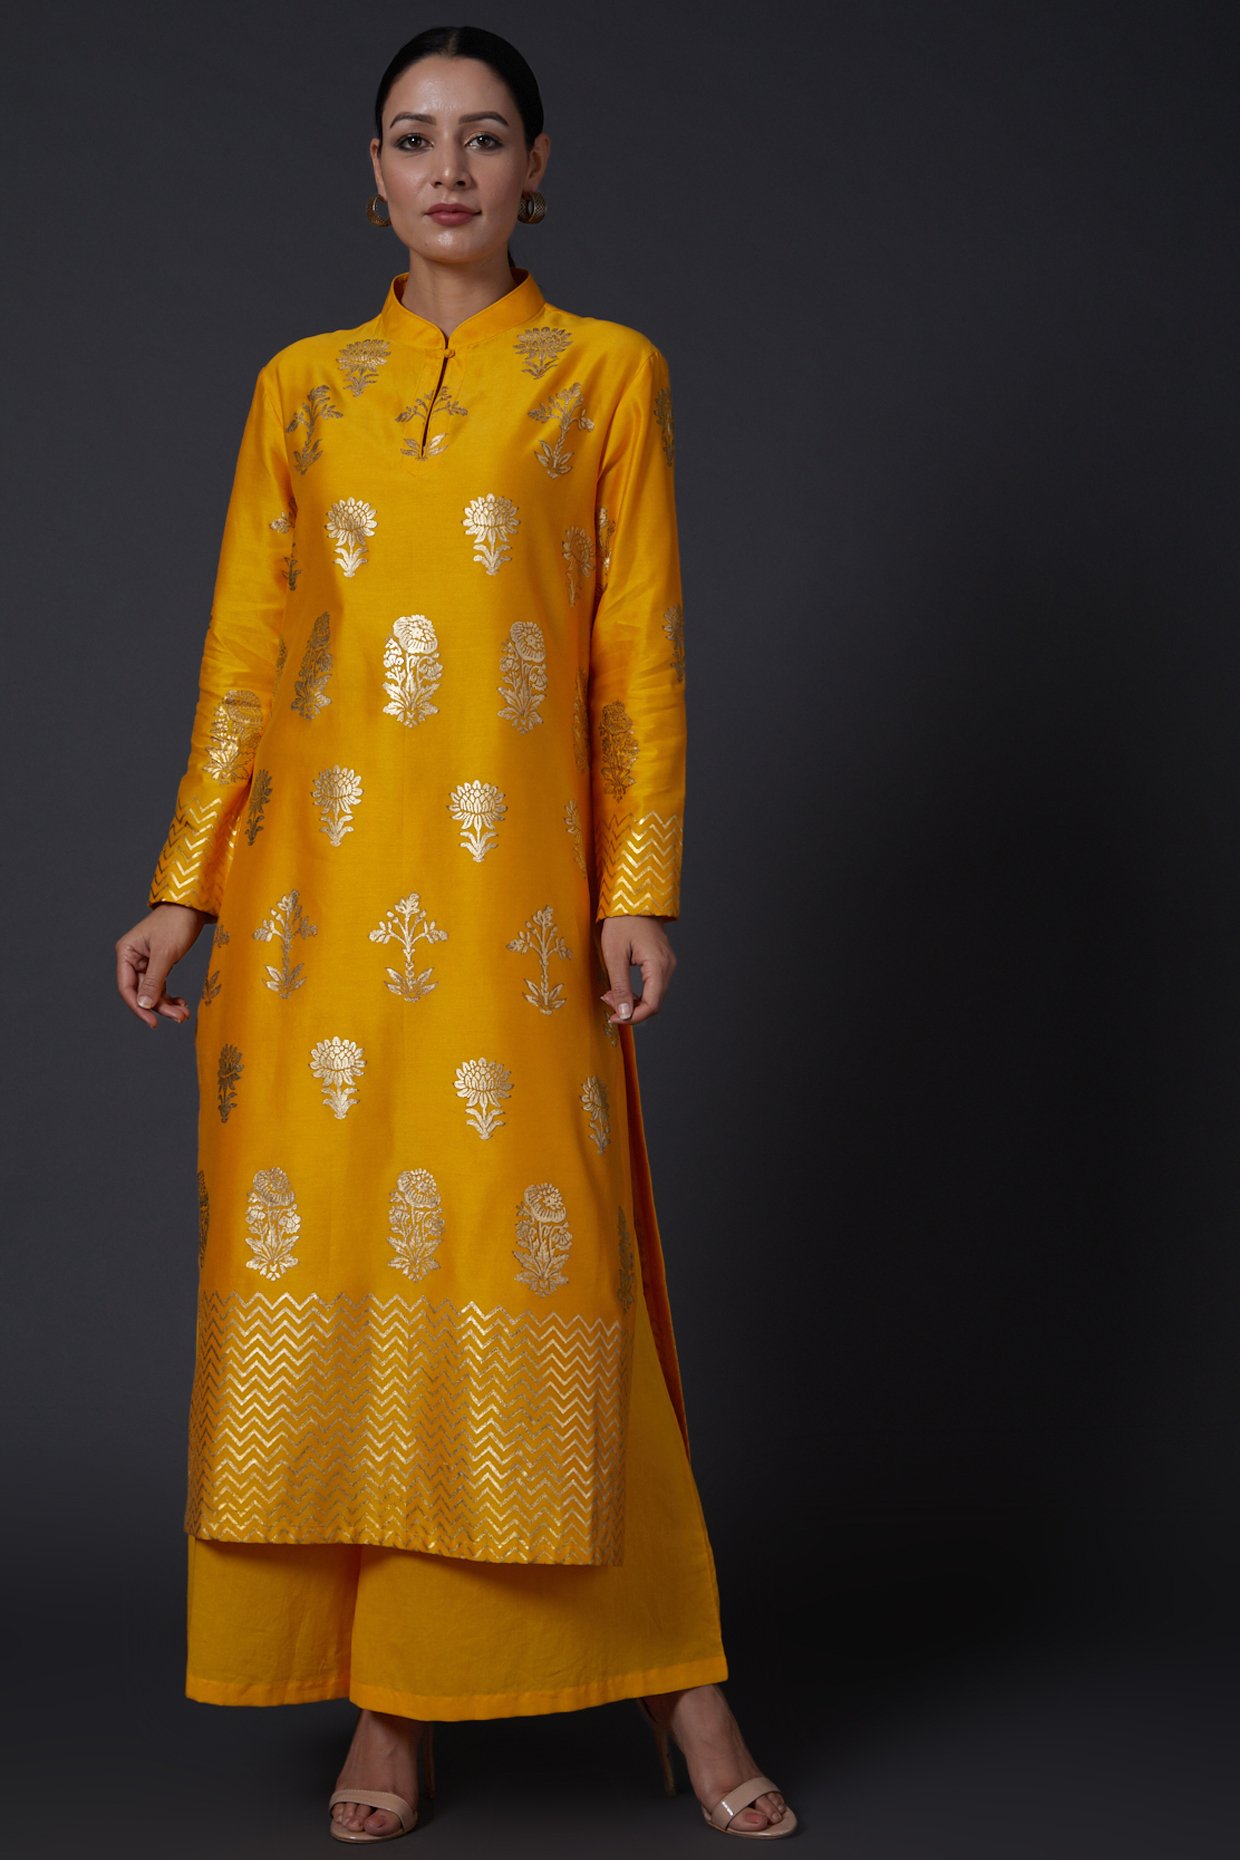 How To Style Your Yellow Kurta The Bollywood Way!